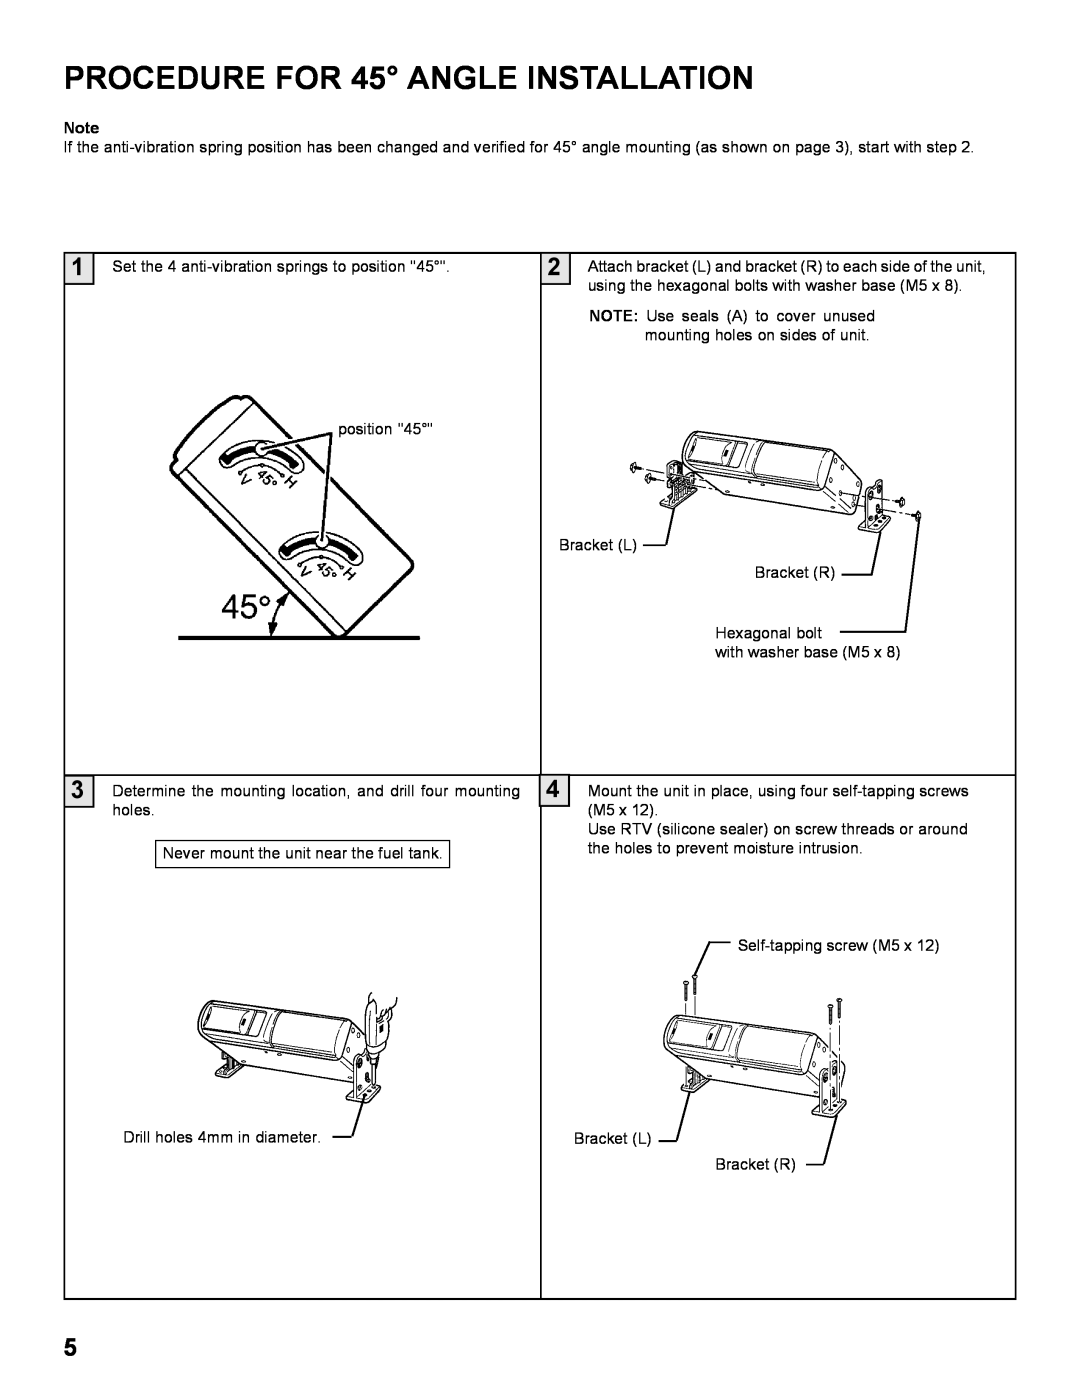 Audiovox SP-10CD installation manual PROCEDURE FOR 45 ANGLE INSTALLATION 